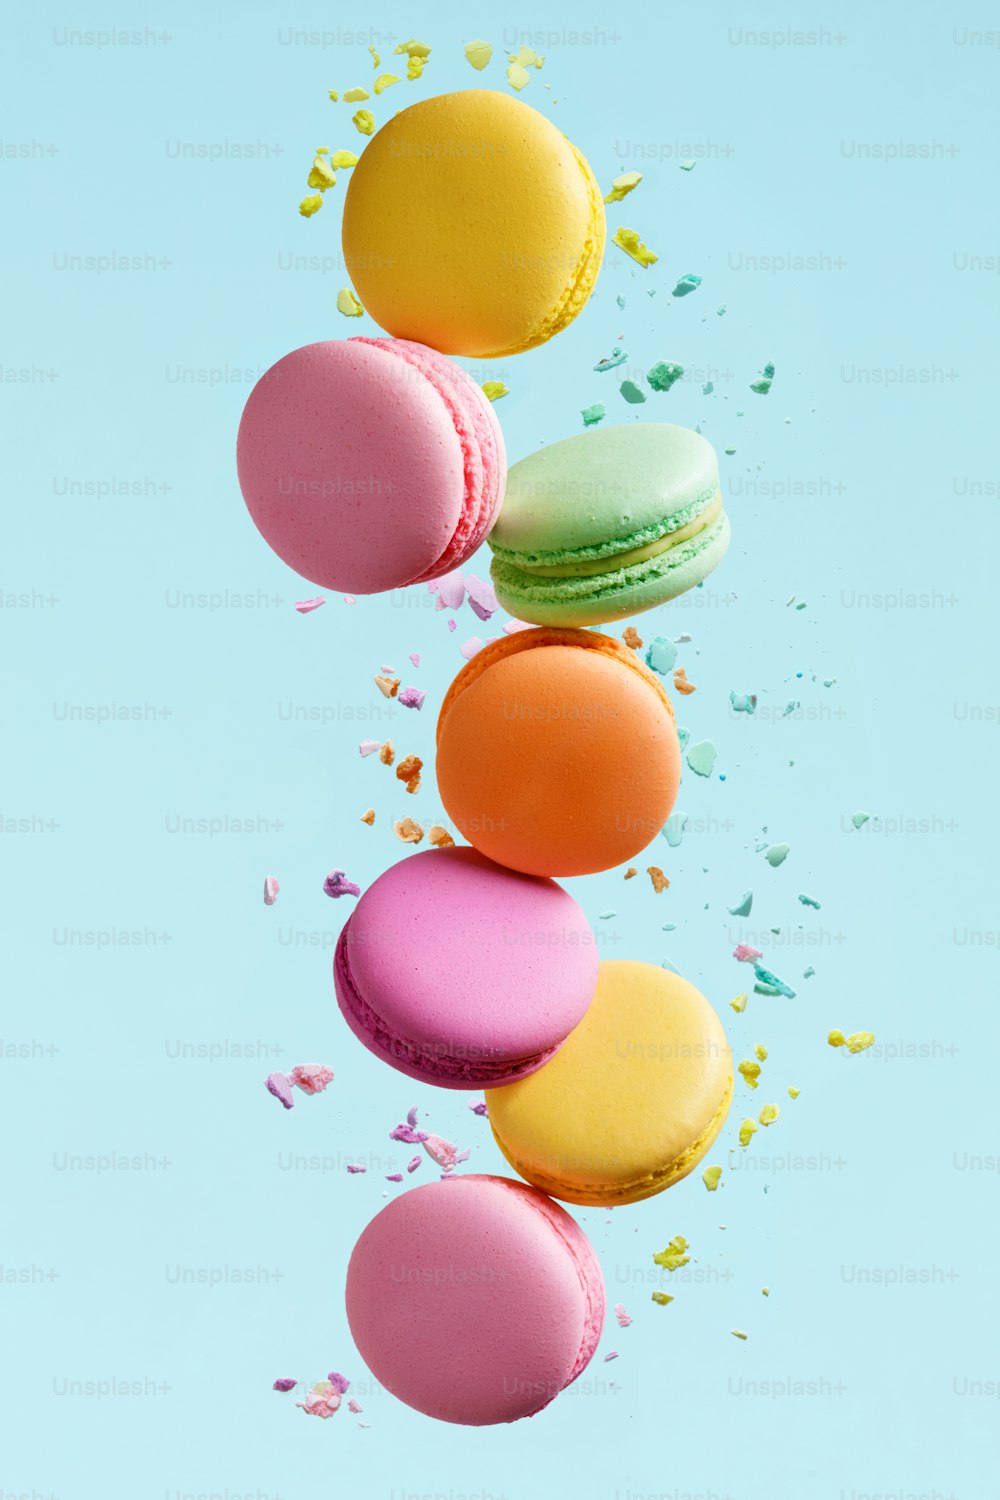 Macaron Dessert. Colorful Macaroons Flying. French Dessert In Motion Falling On Blue Background. High Resolution